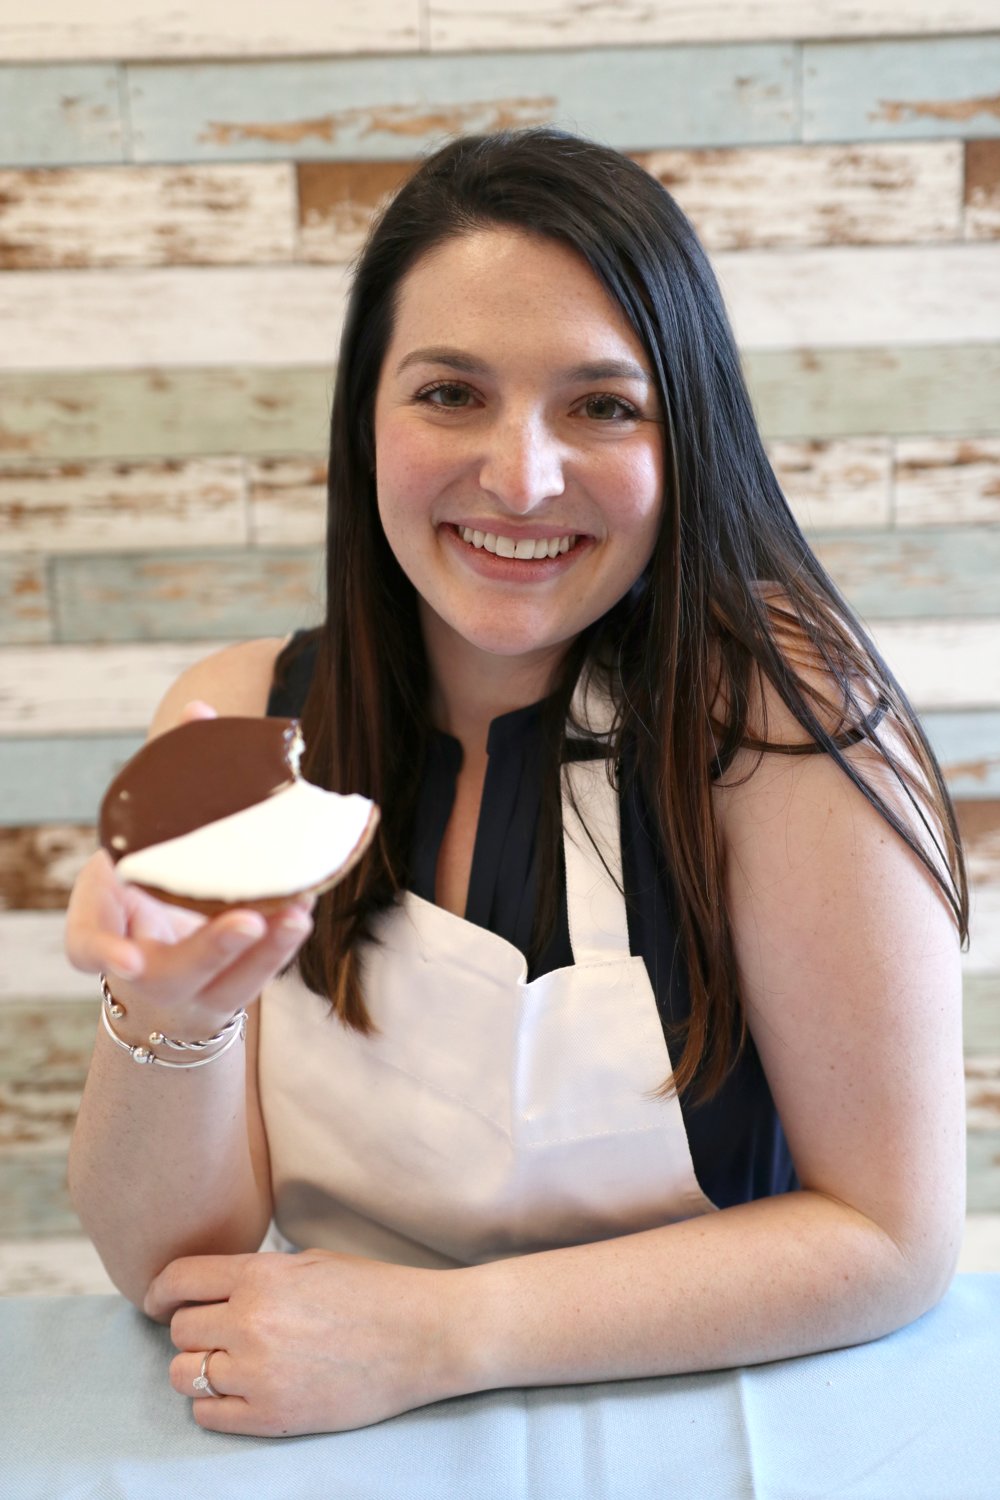 Lisa Maybruch samples a freshly baked black and white cookie.